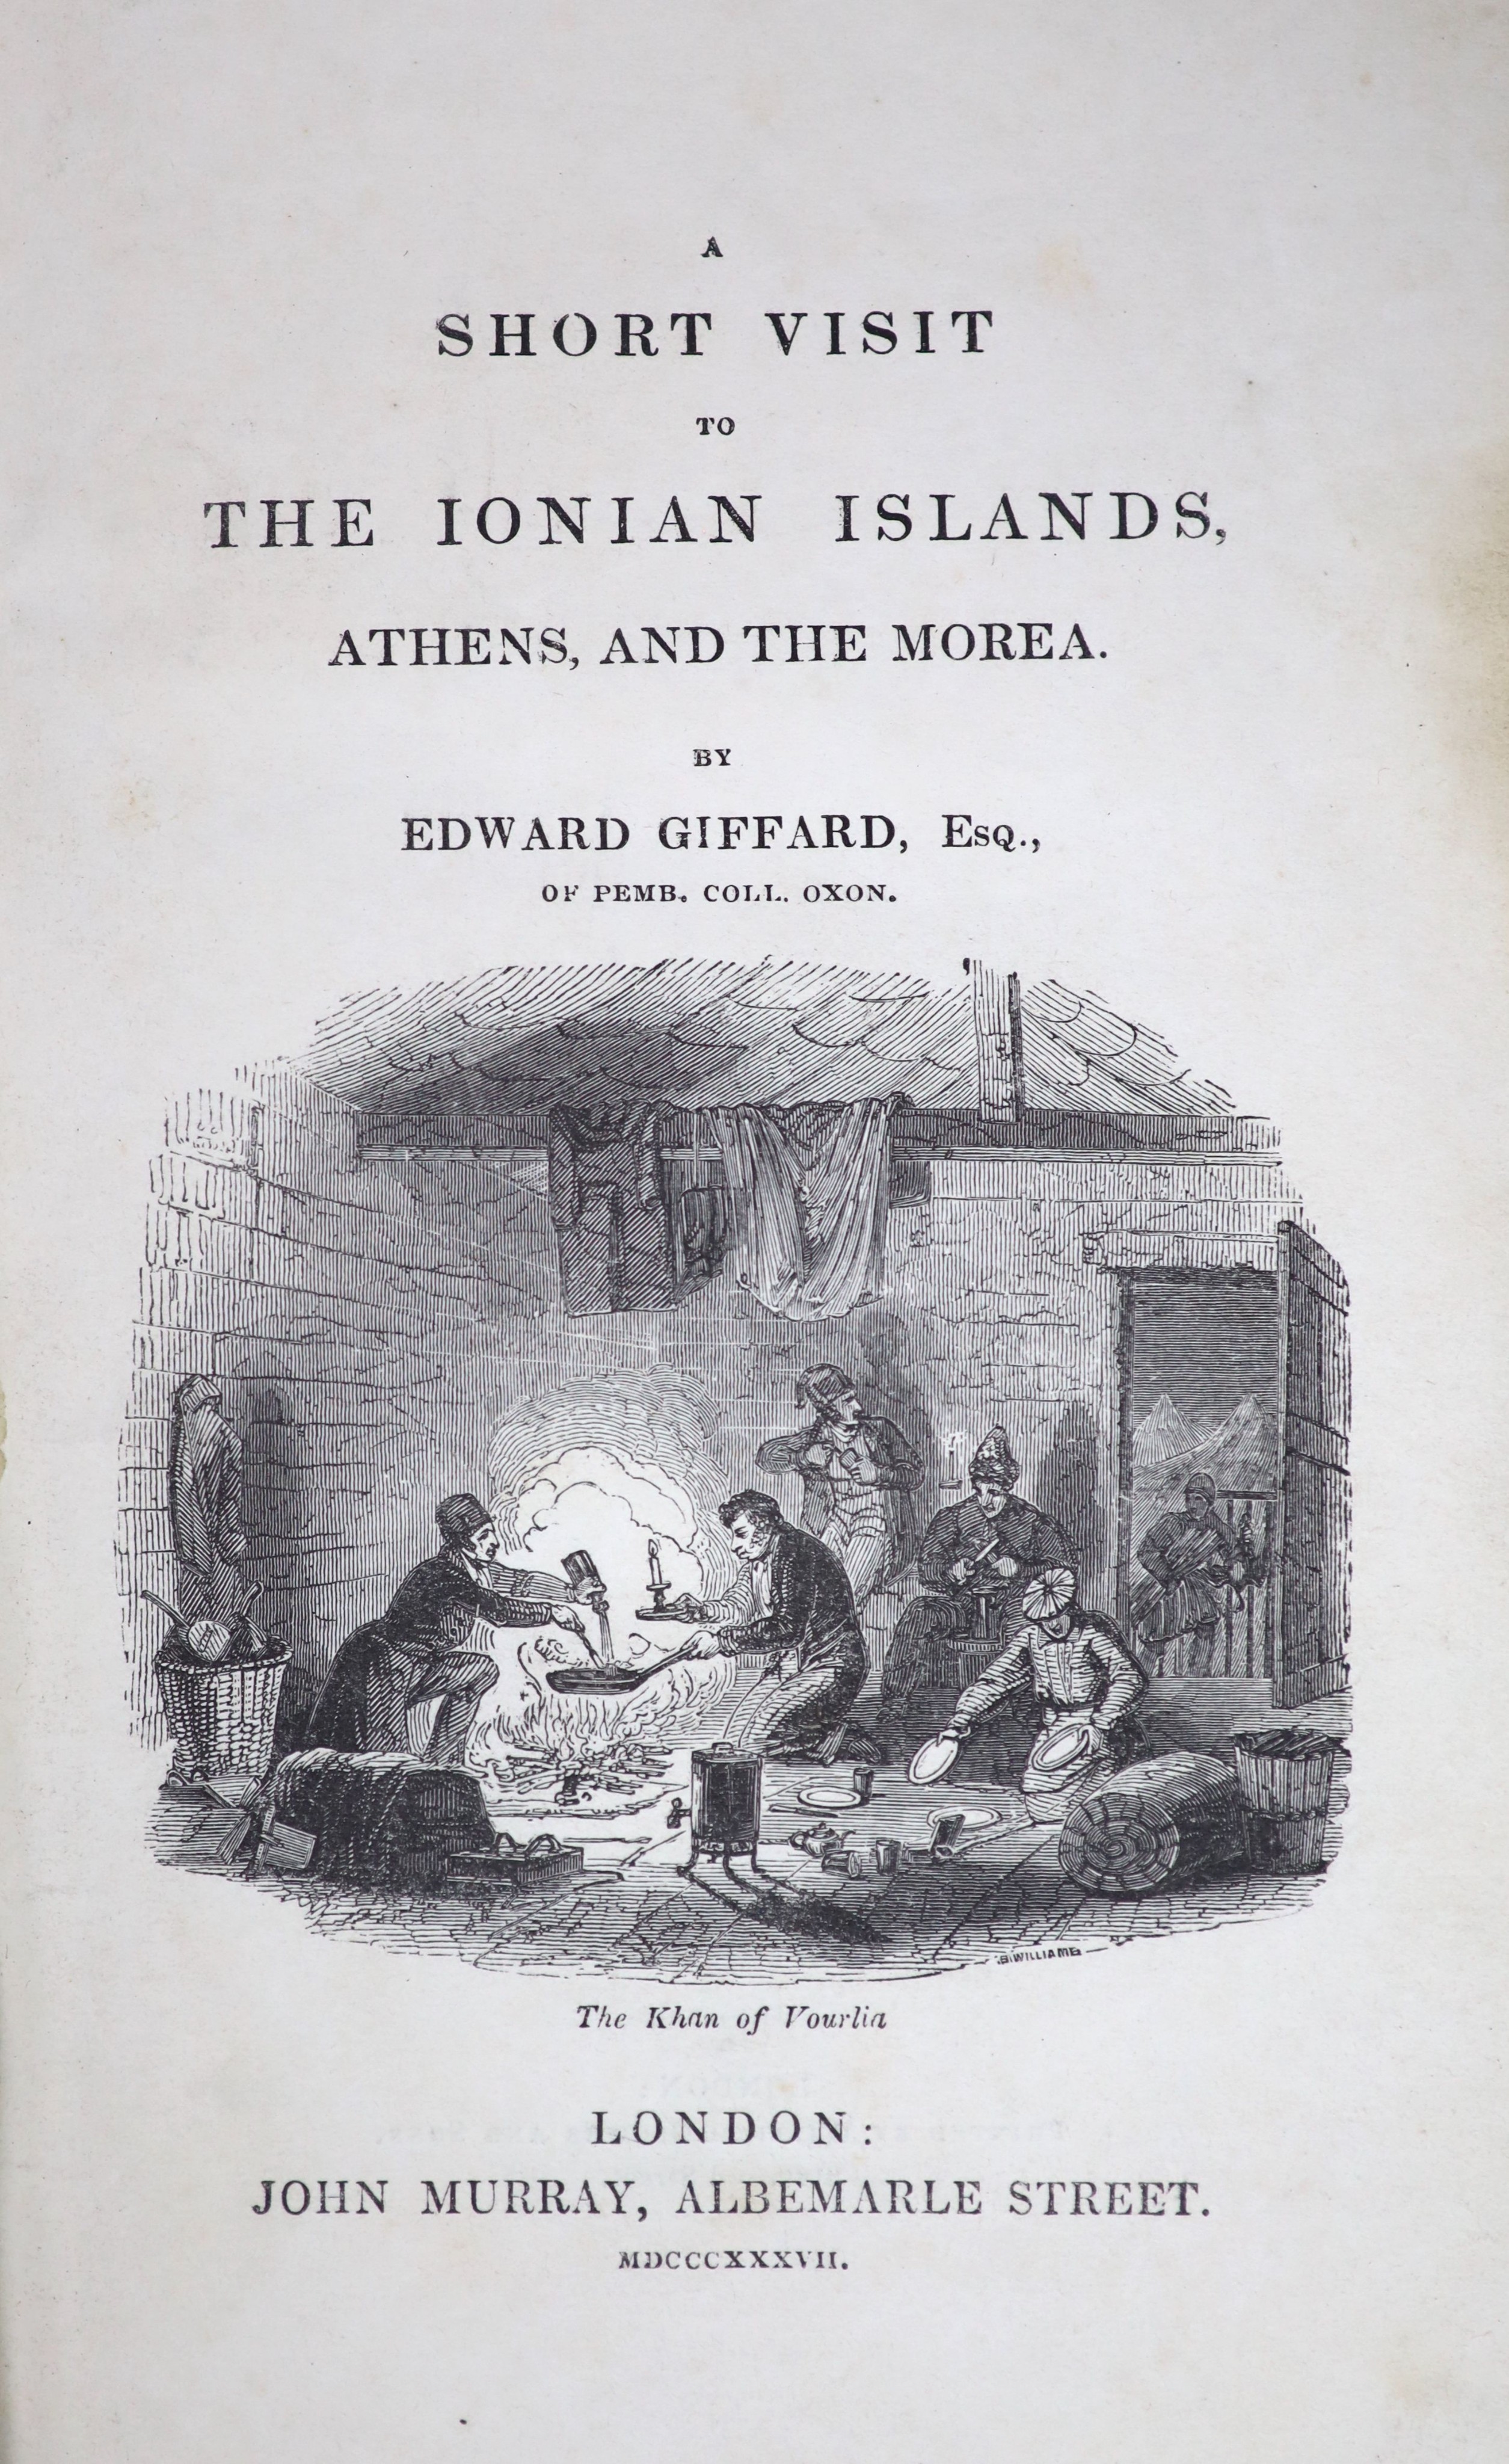 Giffard, Edward - A Short Visit to the Ionian Islands.....1st edition, 8vo, original cloth, with frontis, map and 5 tissue guarded plates, some marginal damp staining, John Murray, London, 1837